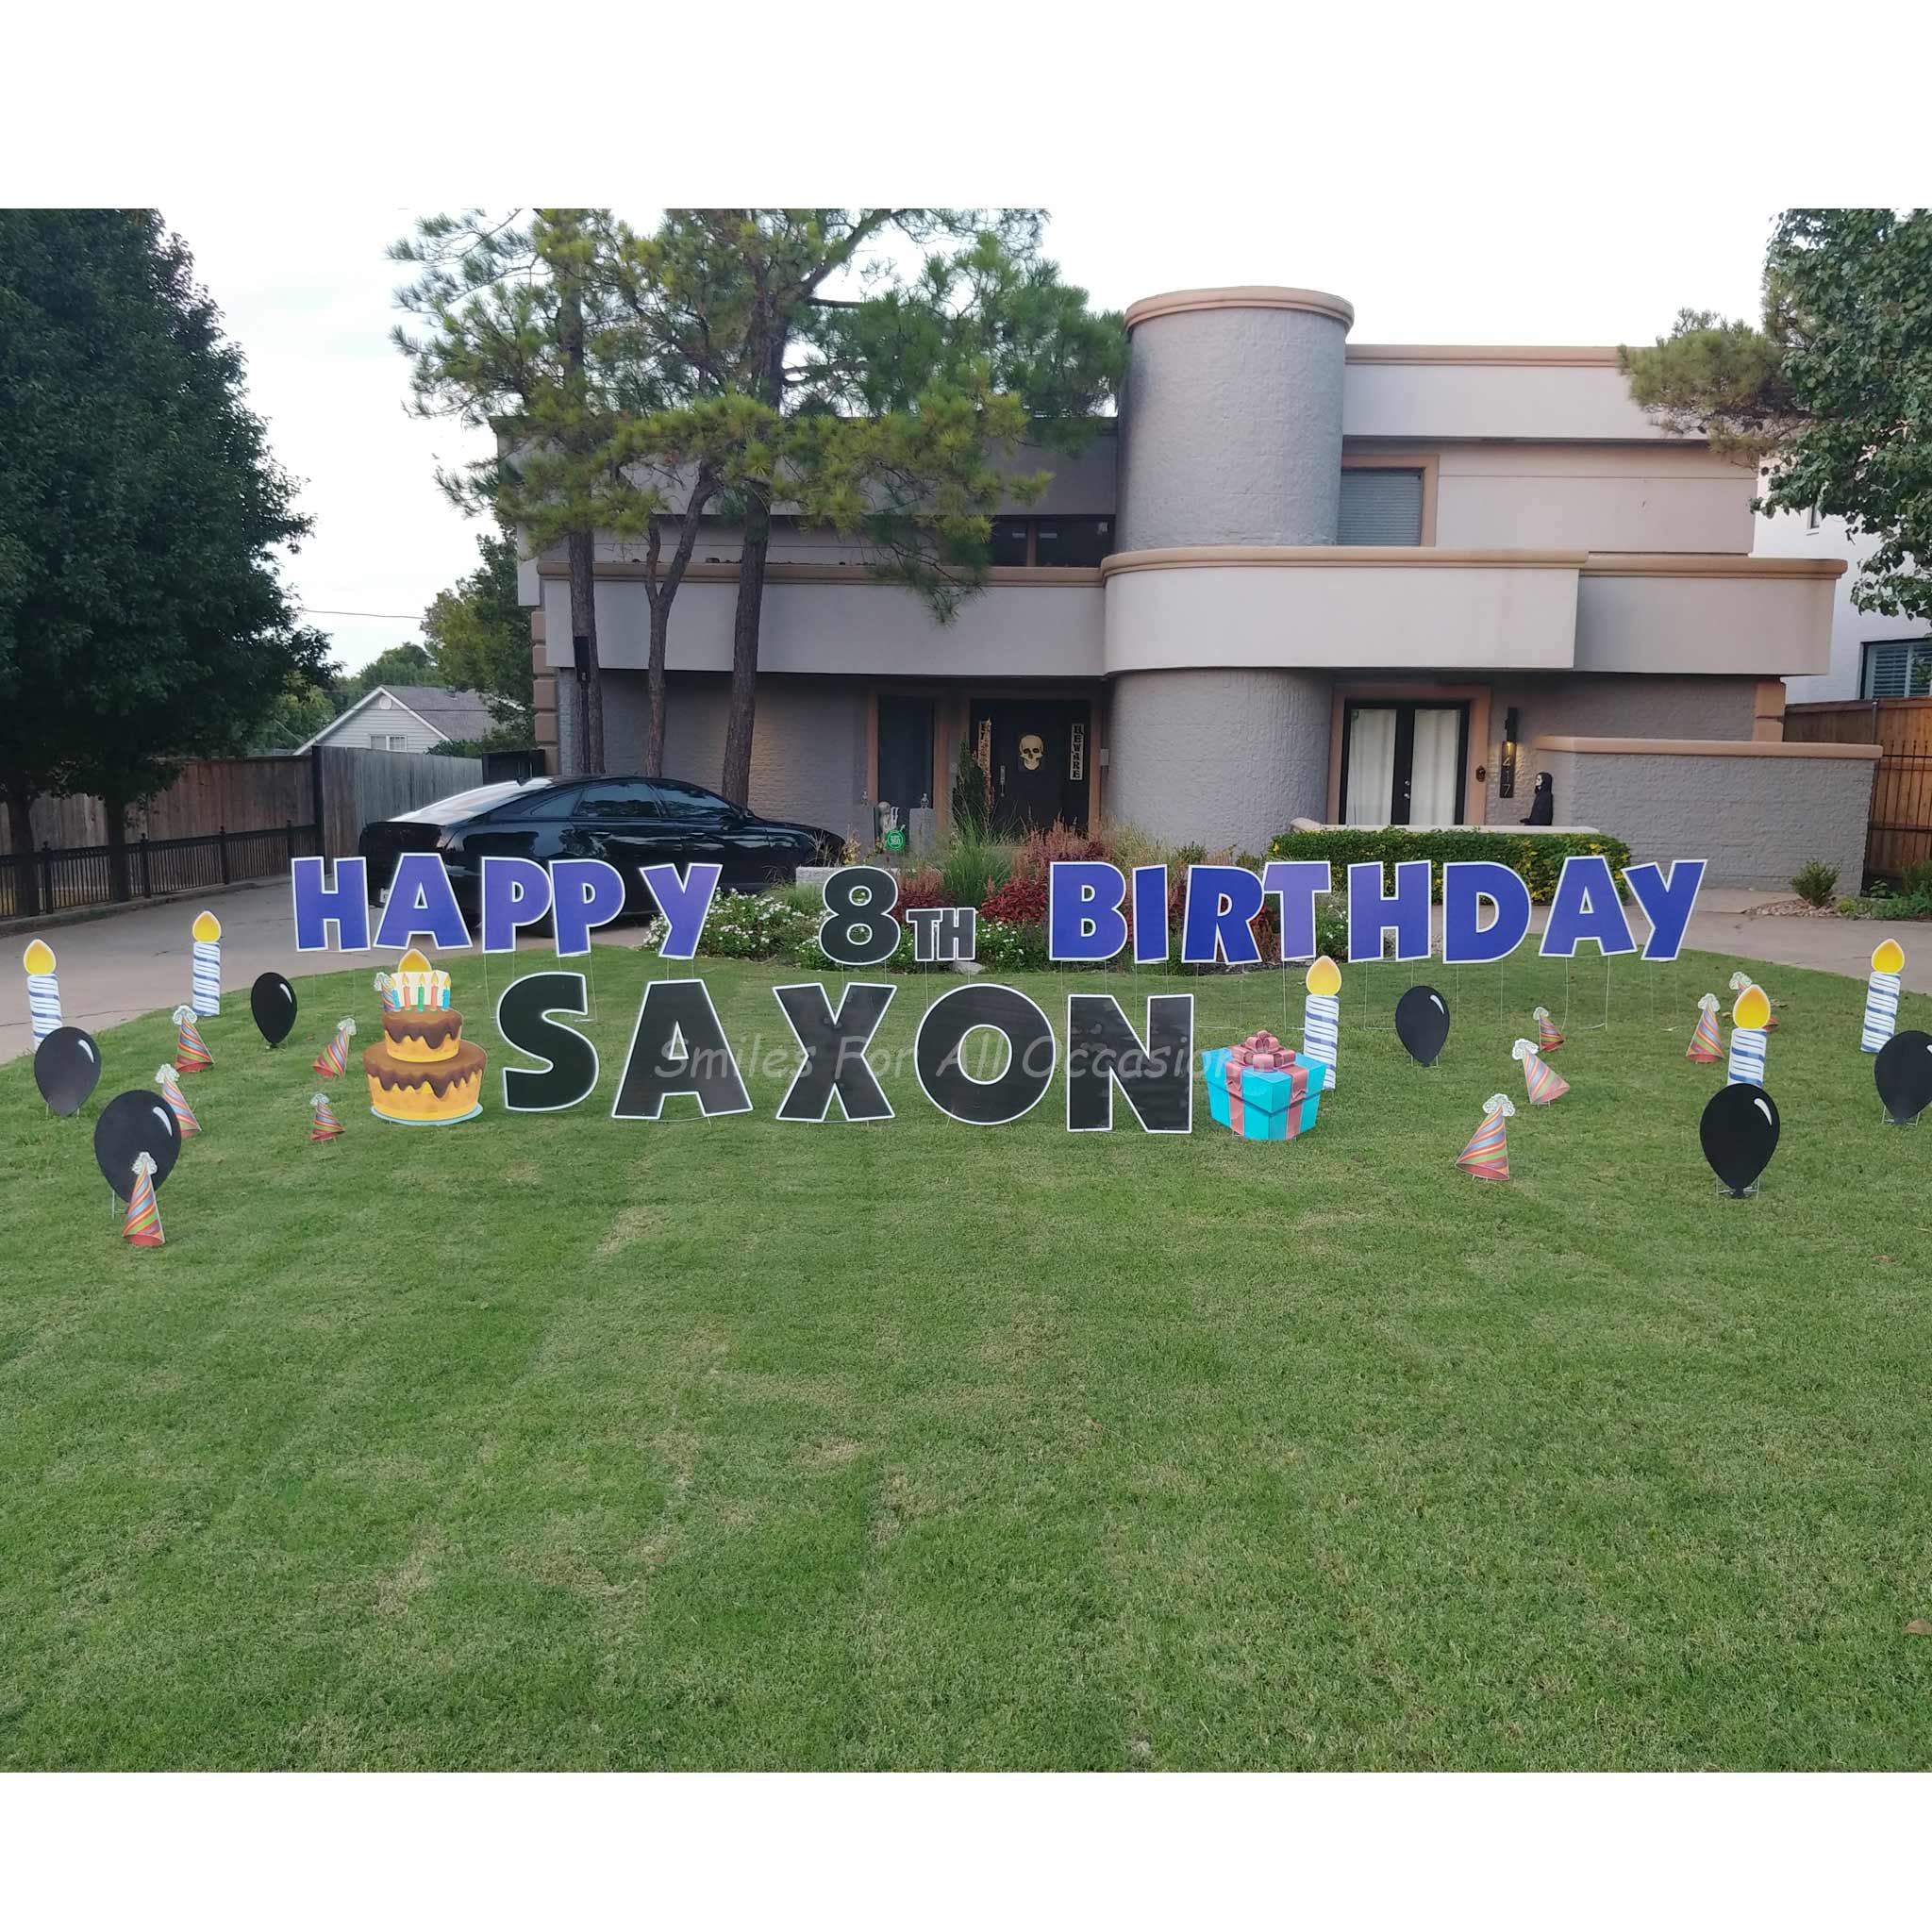 Yard Signs Blue and Black Letters with Birthday Cake, Candles and Black Balloons